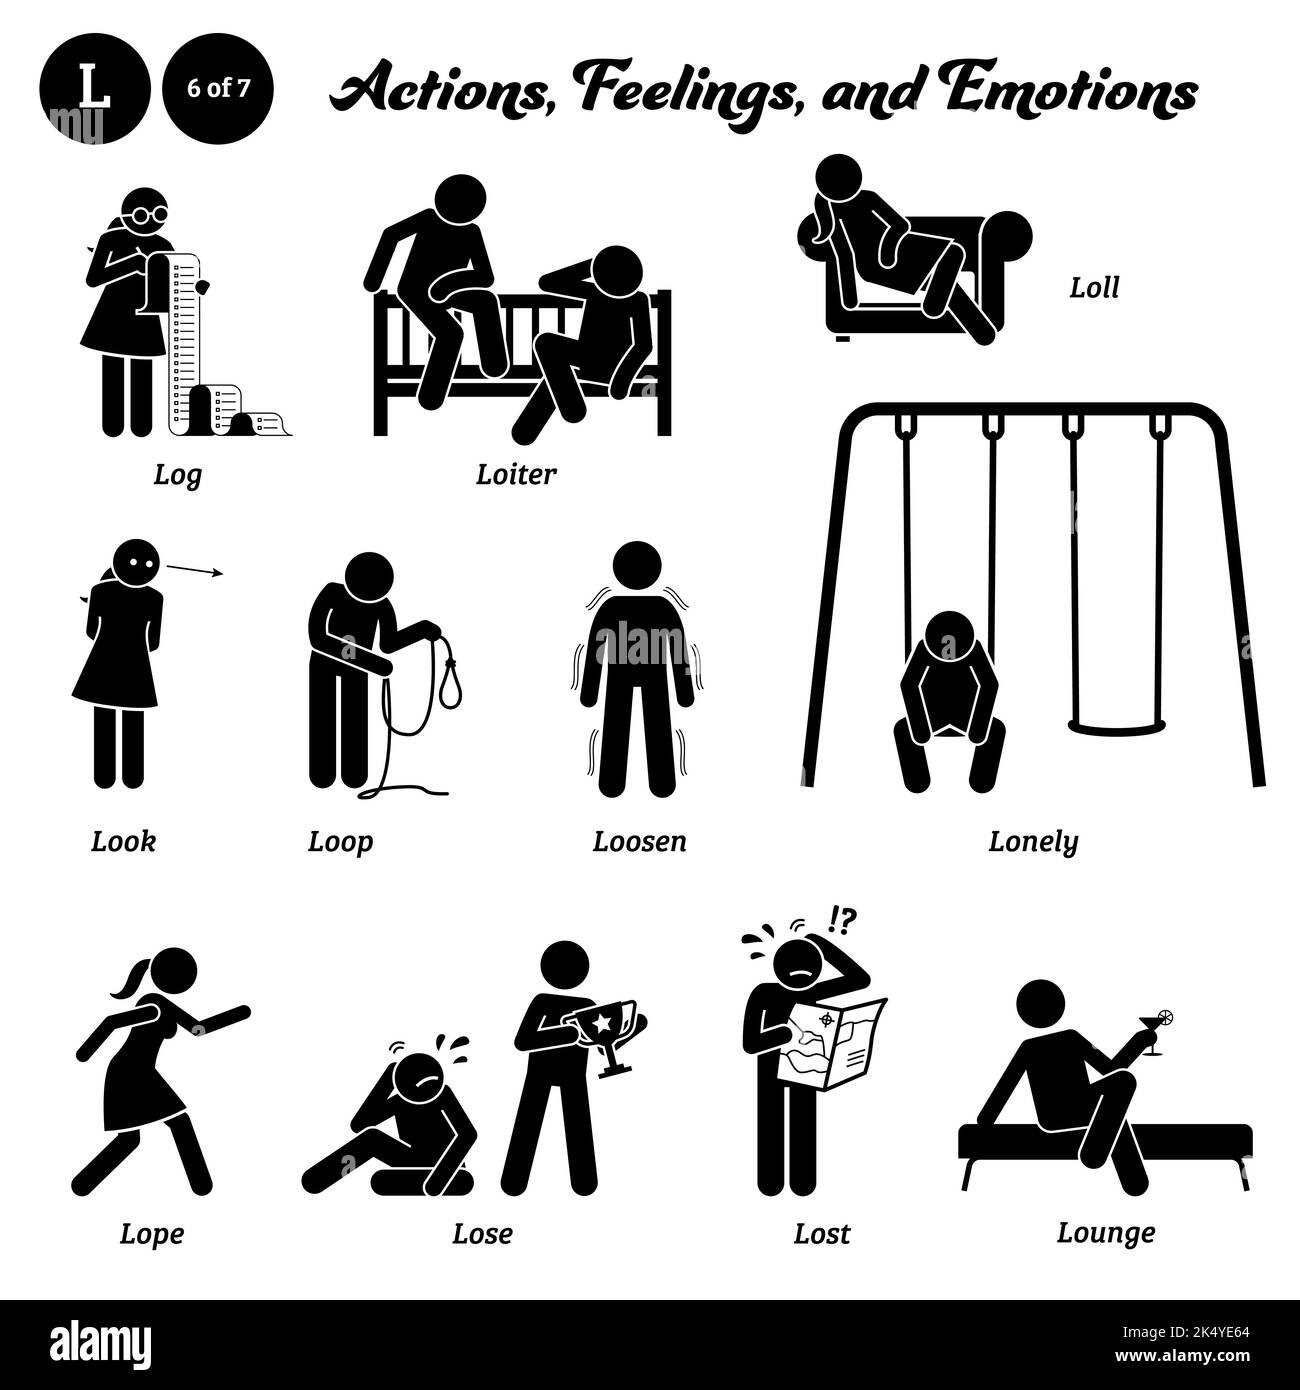 Stick figure human people man action, feelings, and emotions icons alphabet L. Log, loiter, loll, look, loop, loosen, lonely, lope, lose, lost, and lo Stock Vector